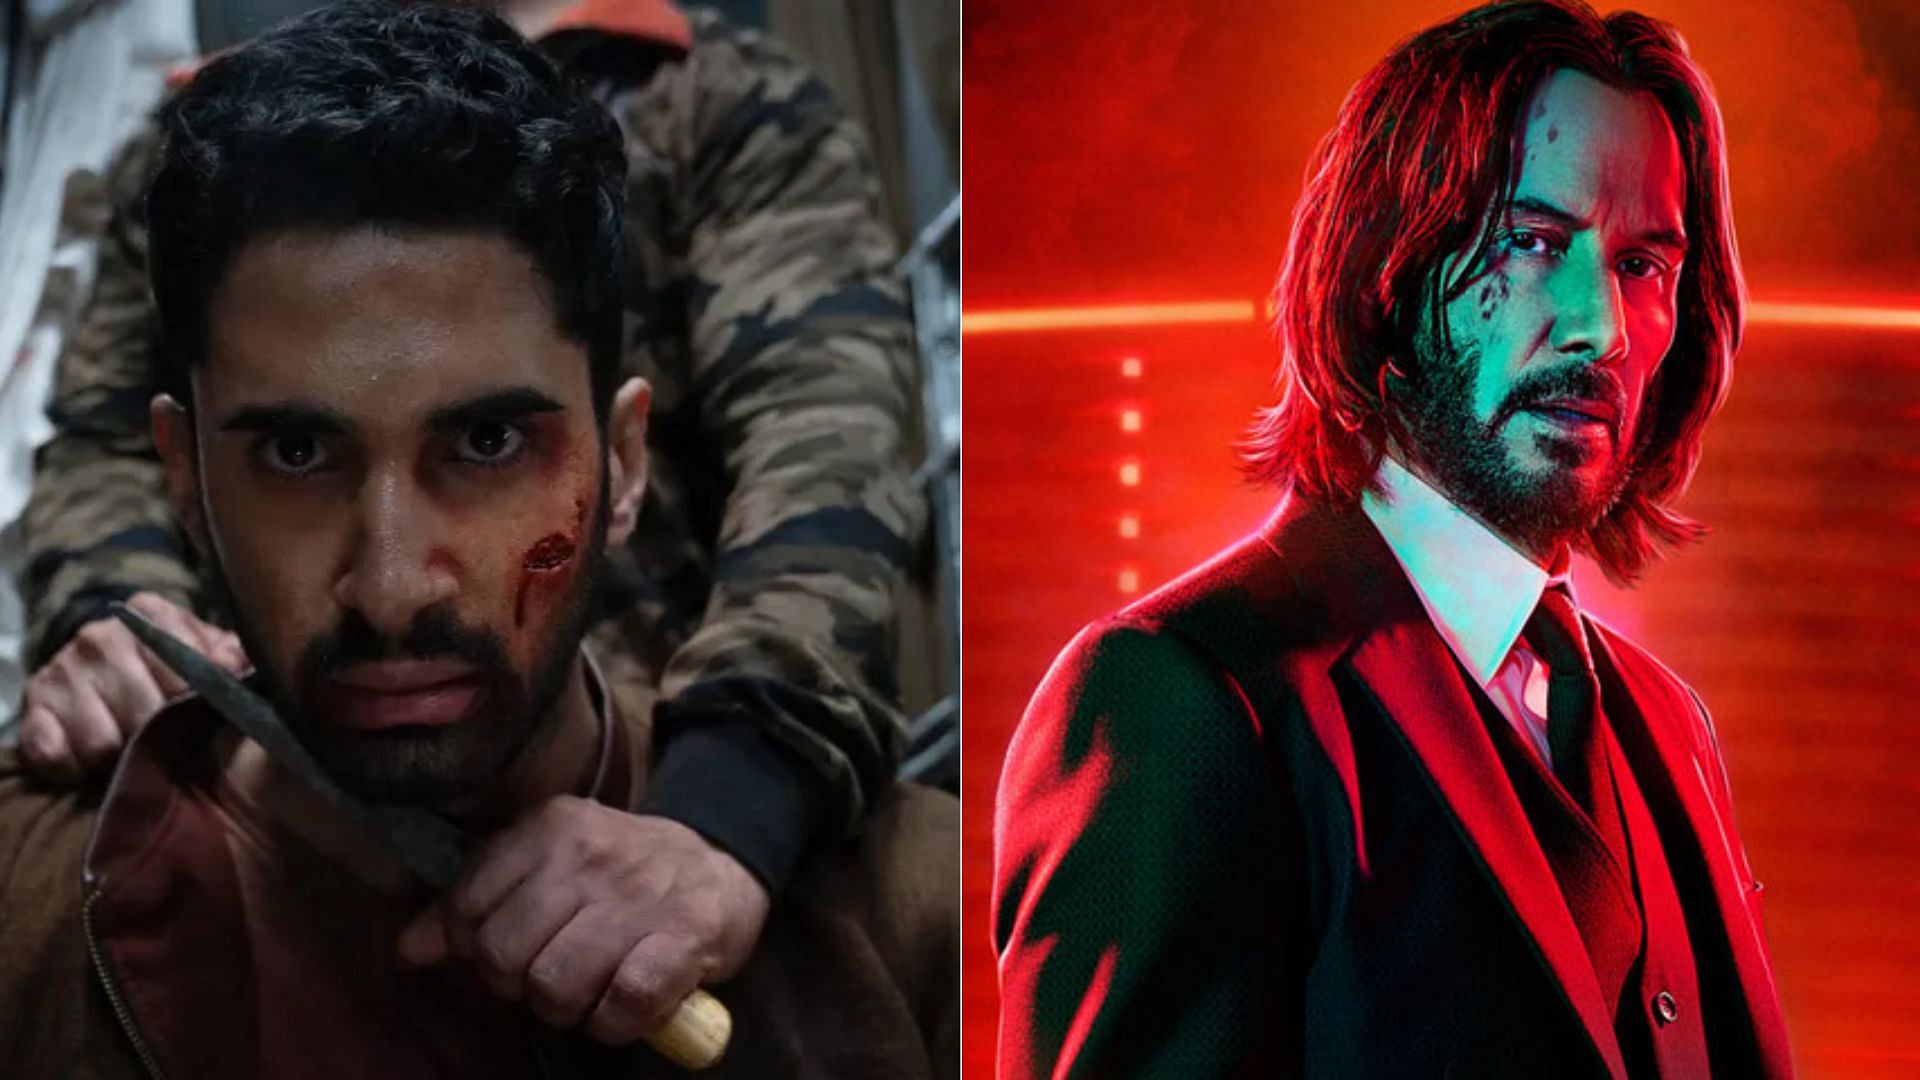 <div class="paragraphs"><p>'John Wick' director teams up with Karan Johar for an English remake of 'Kill'. Get all the details on this exciting collaboration!</p></div>